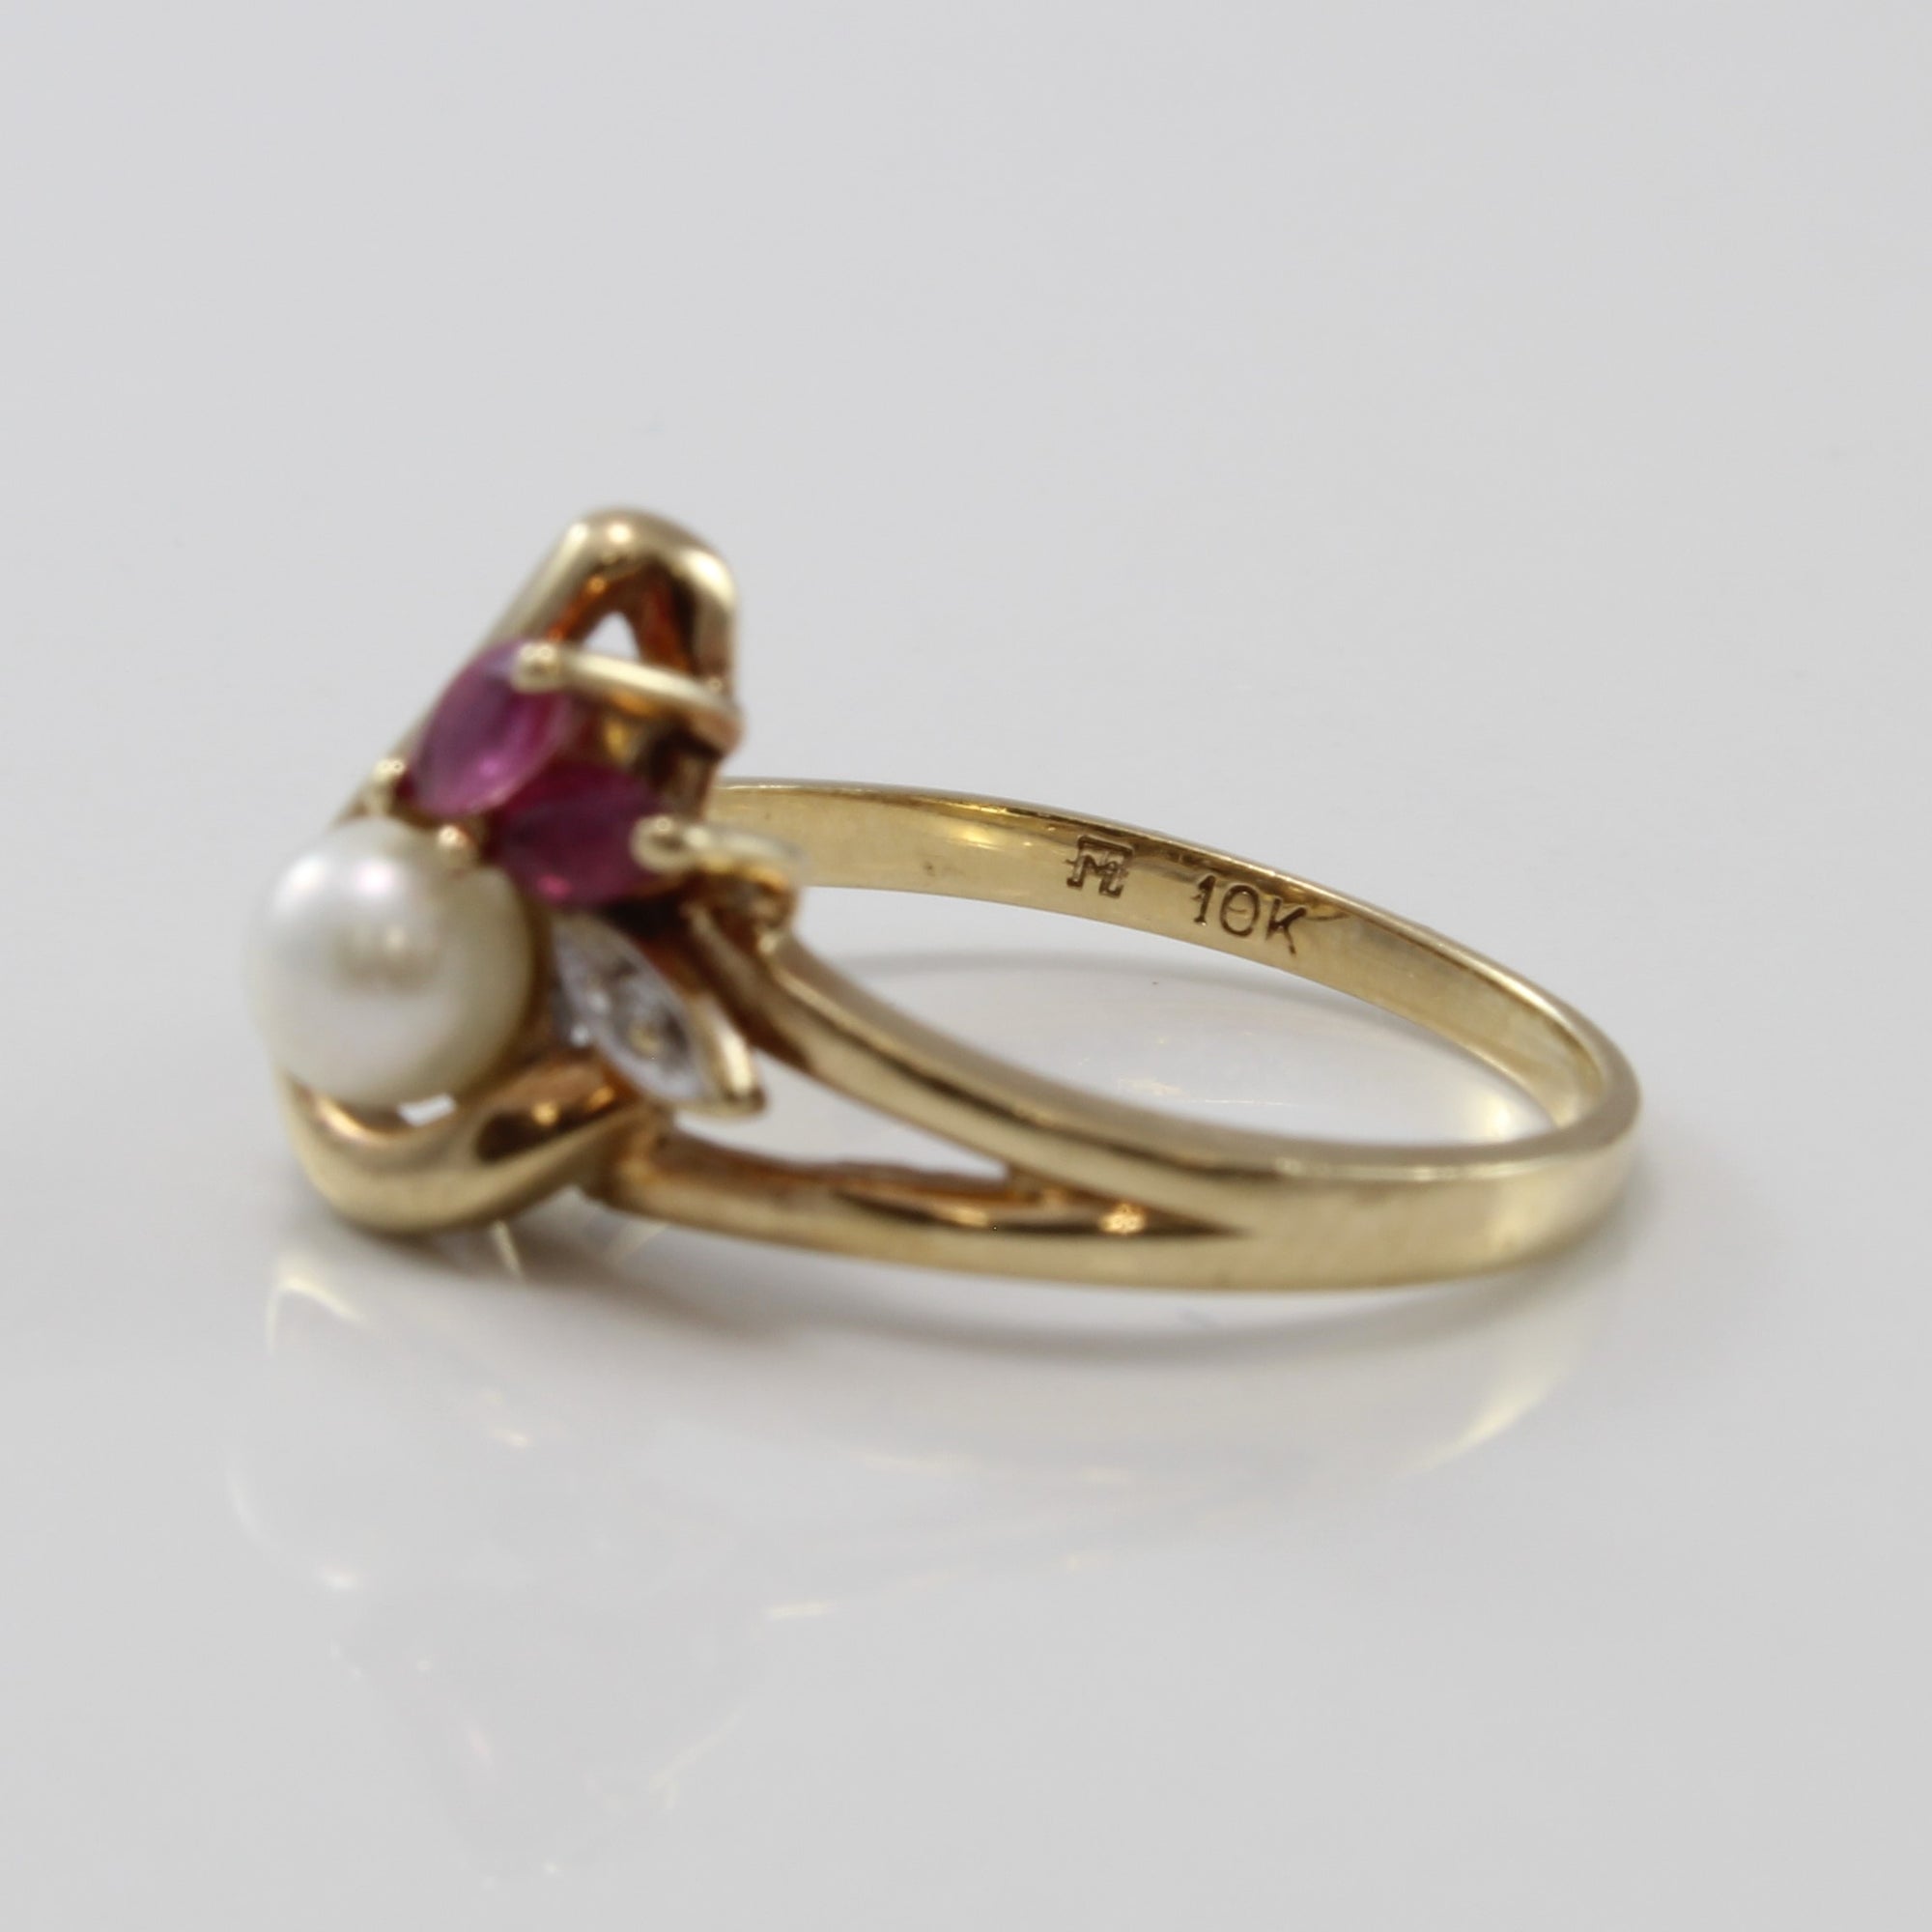 Pearl & Marquise Ruby Ring | 0.60ct, 0.12ctw | SZ 6.25 |